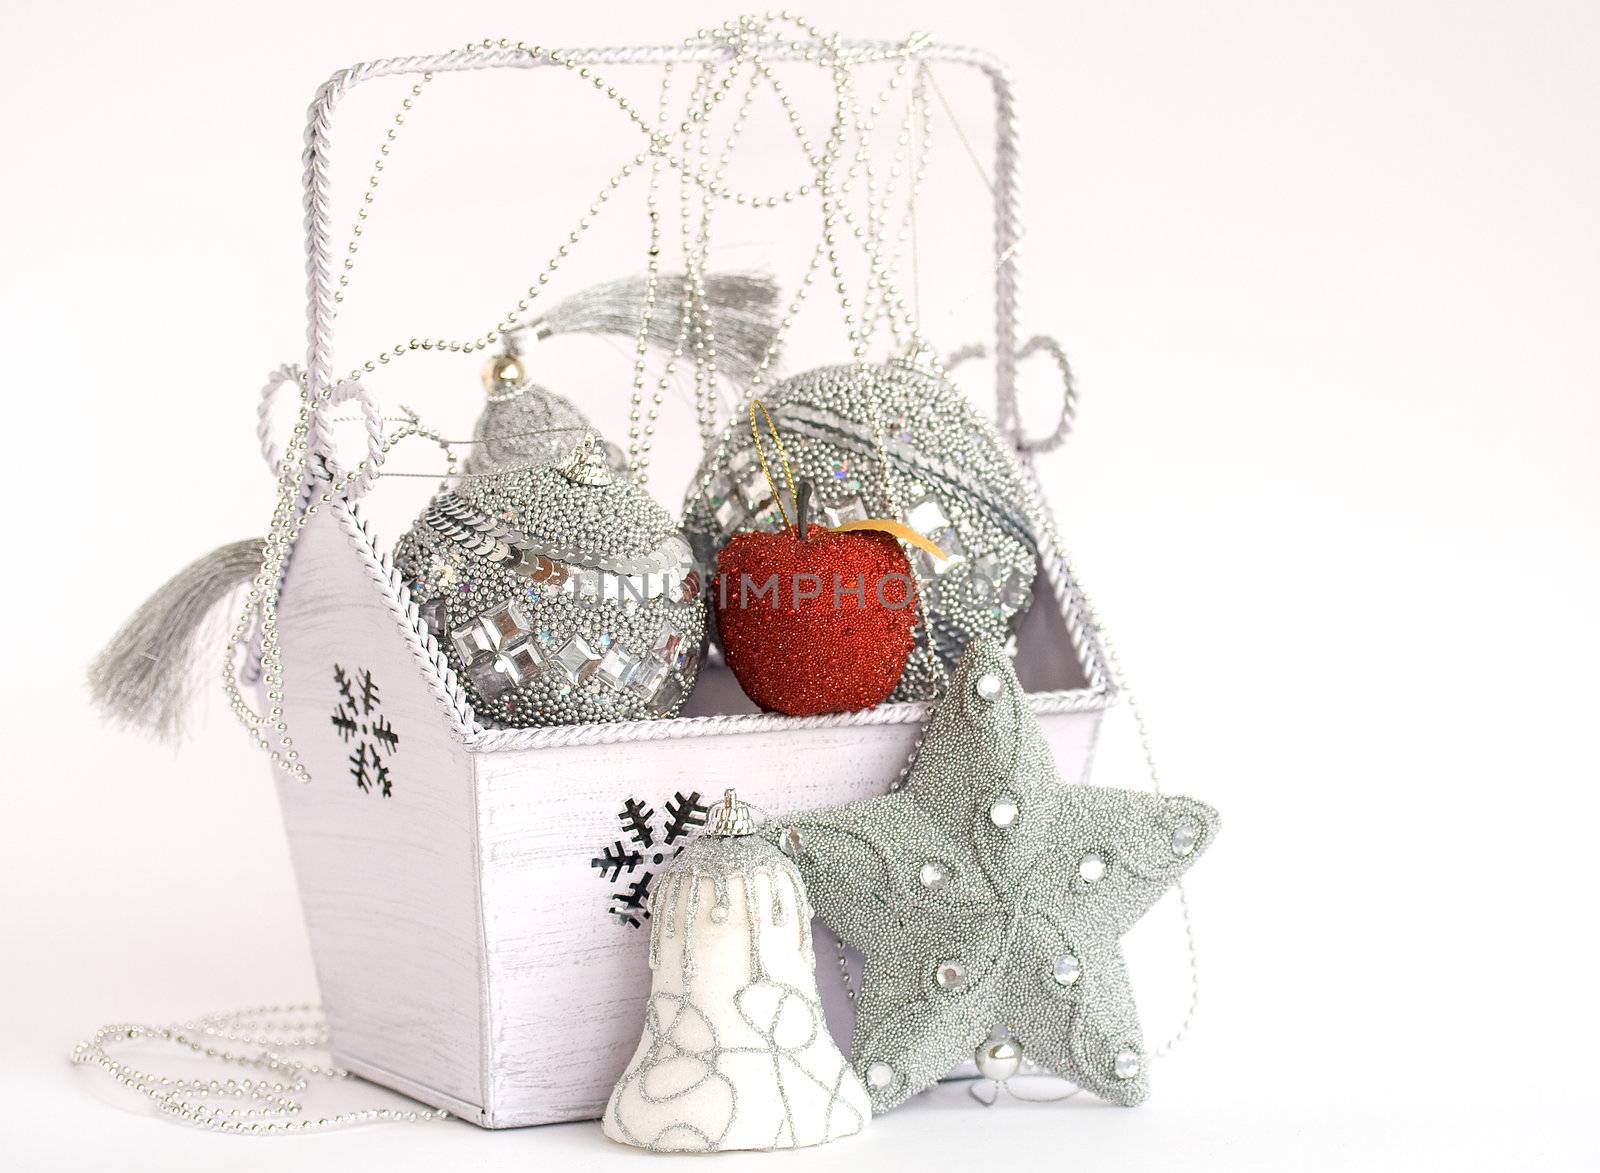 Red apple in box with silver christmas decoration by serpl